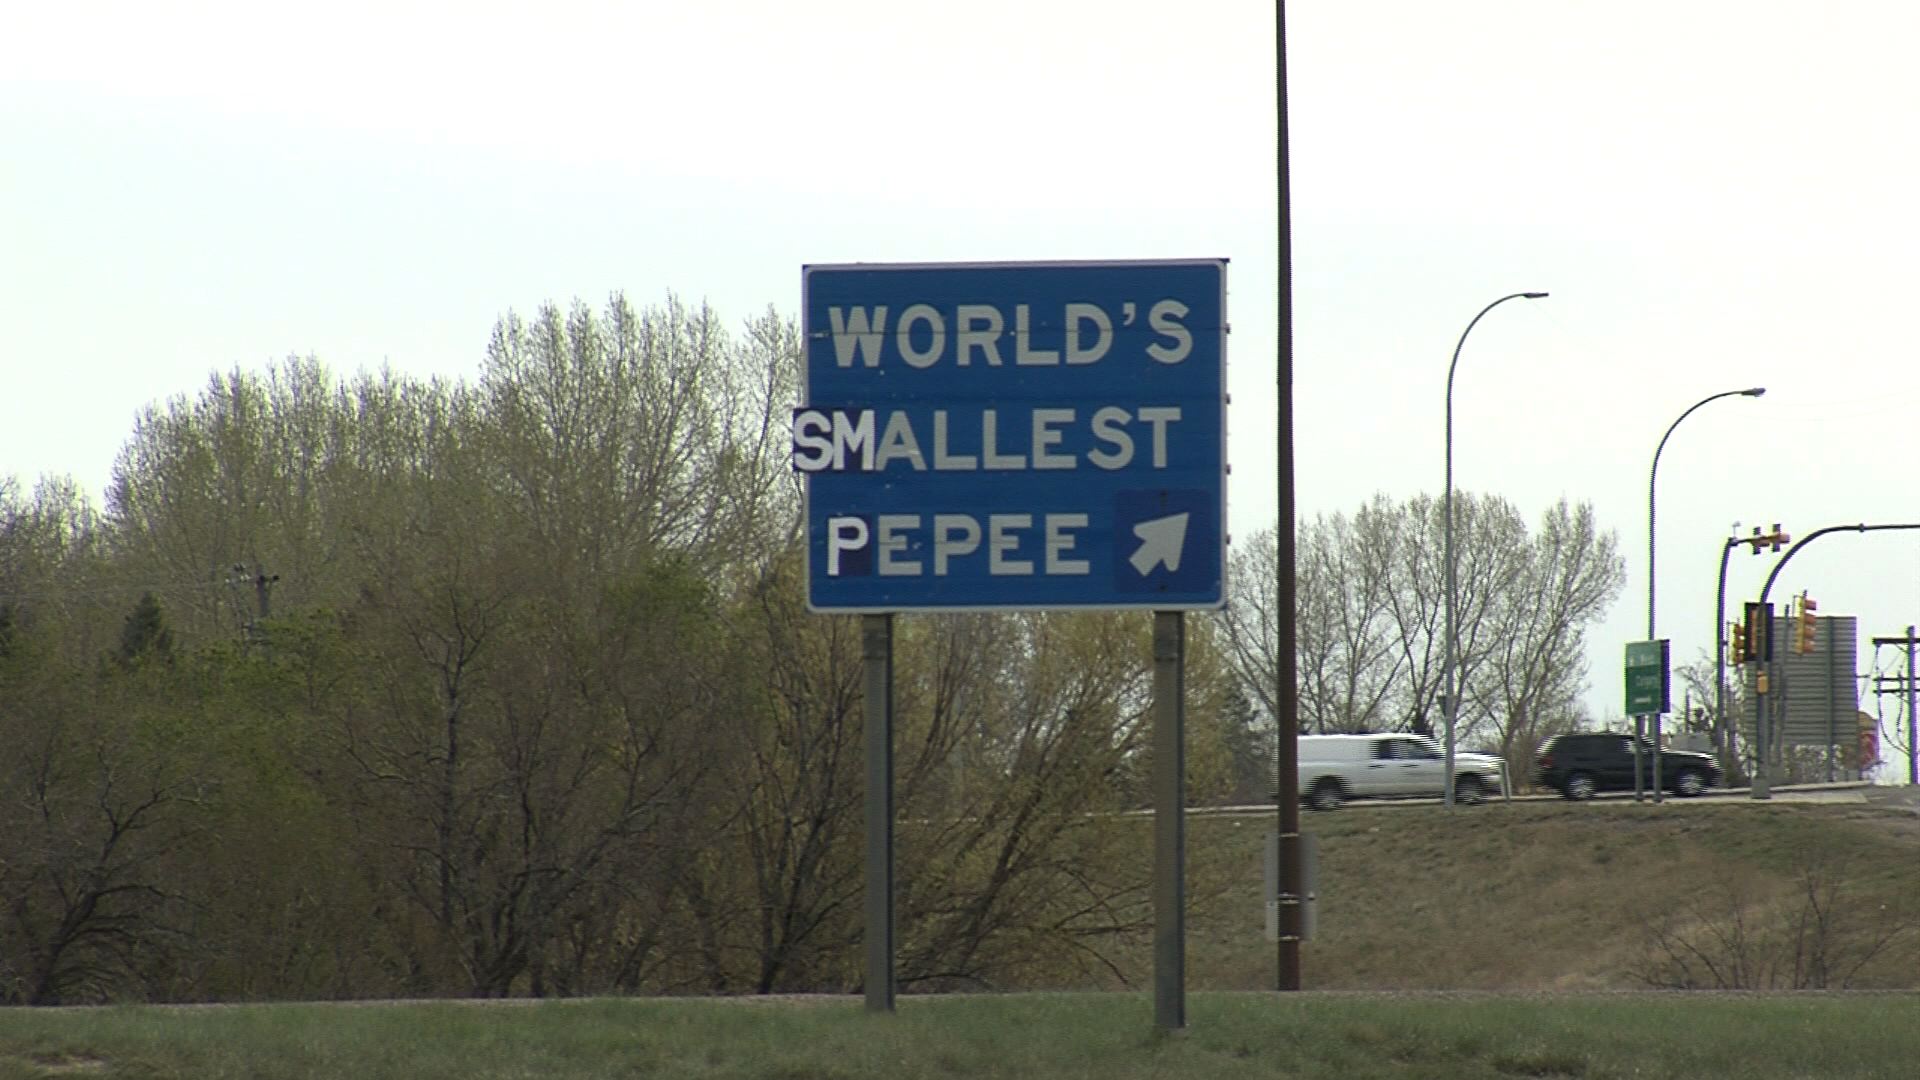 world's largest teepee - World'S Smallest Pepee A